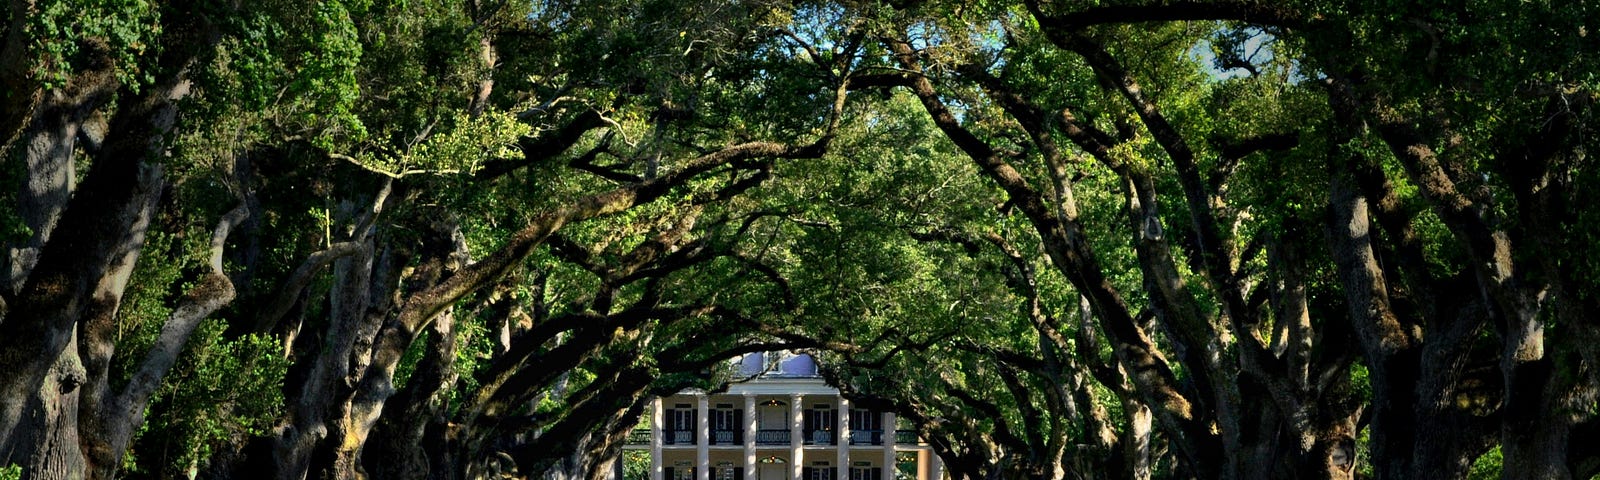 View down the sidewalk through the overhanging branches of trees to a southern plantation home.